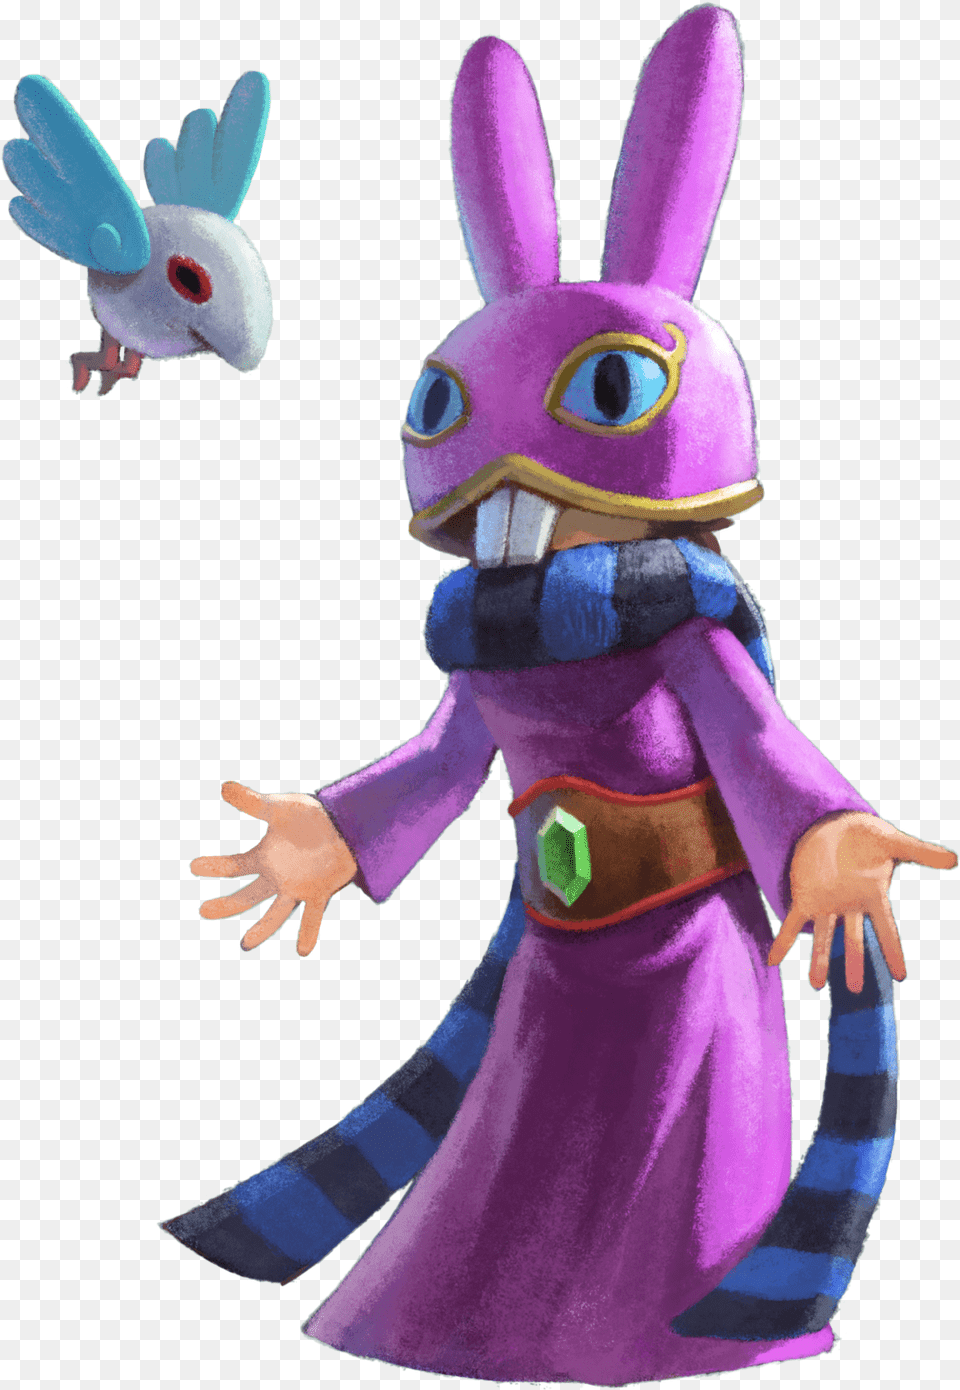 Masks In The Game Which Are Created By The Passing Toon Zelda Hyrule Warriors, Purple, Toy, Cartoon Png Image